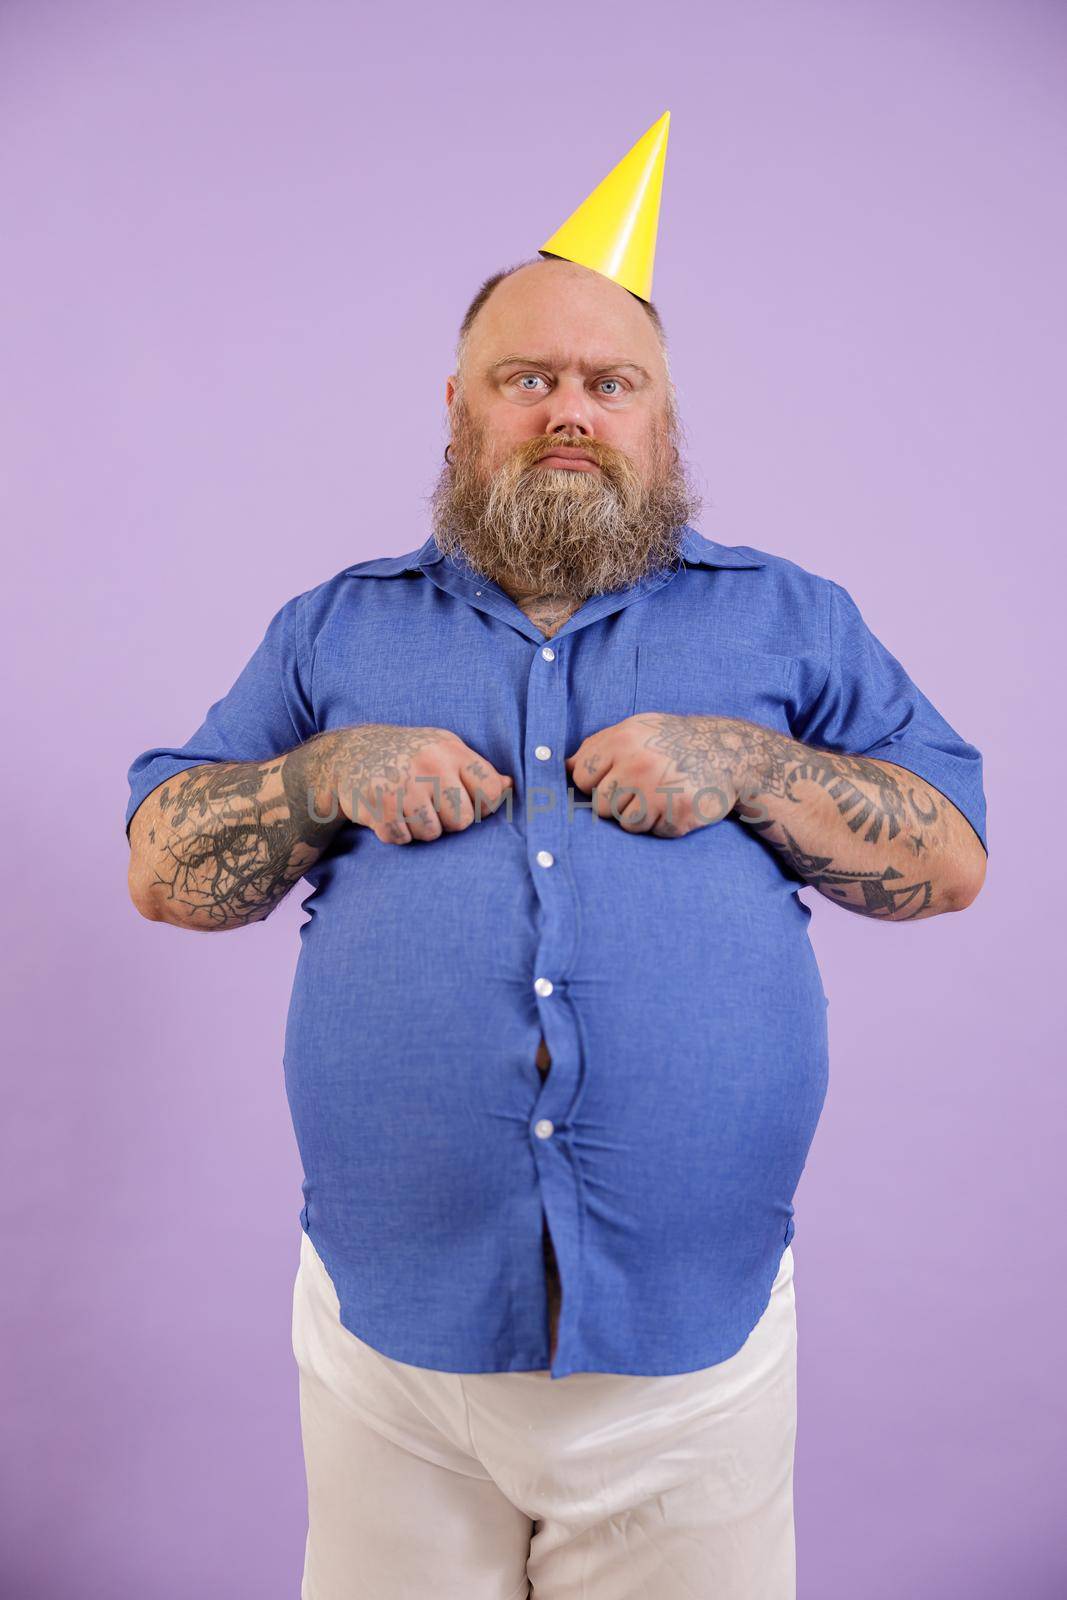 Displeasured man with overweight in party hat poses on purple background by Yaroslav_astakhov